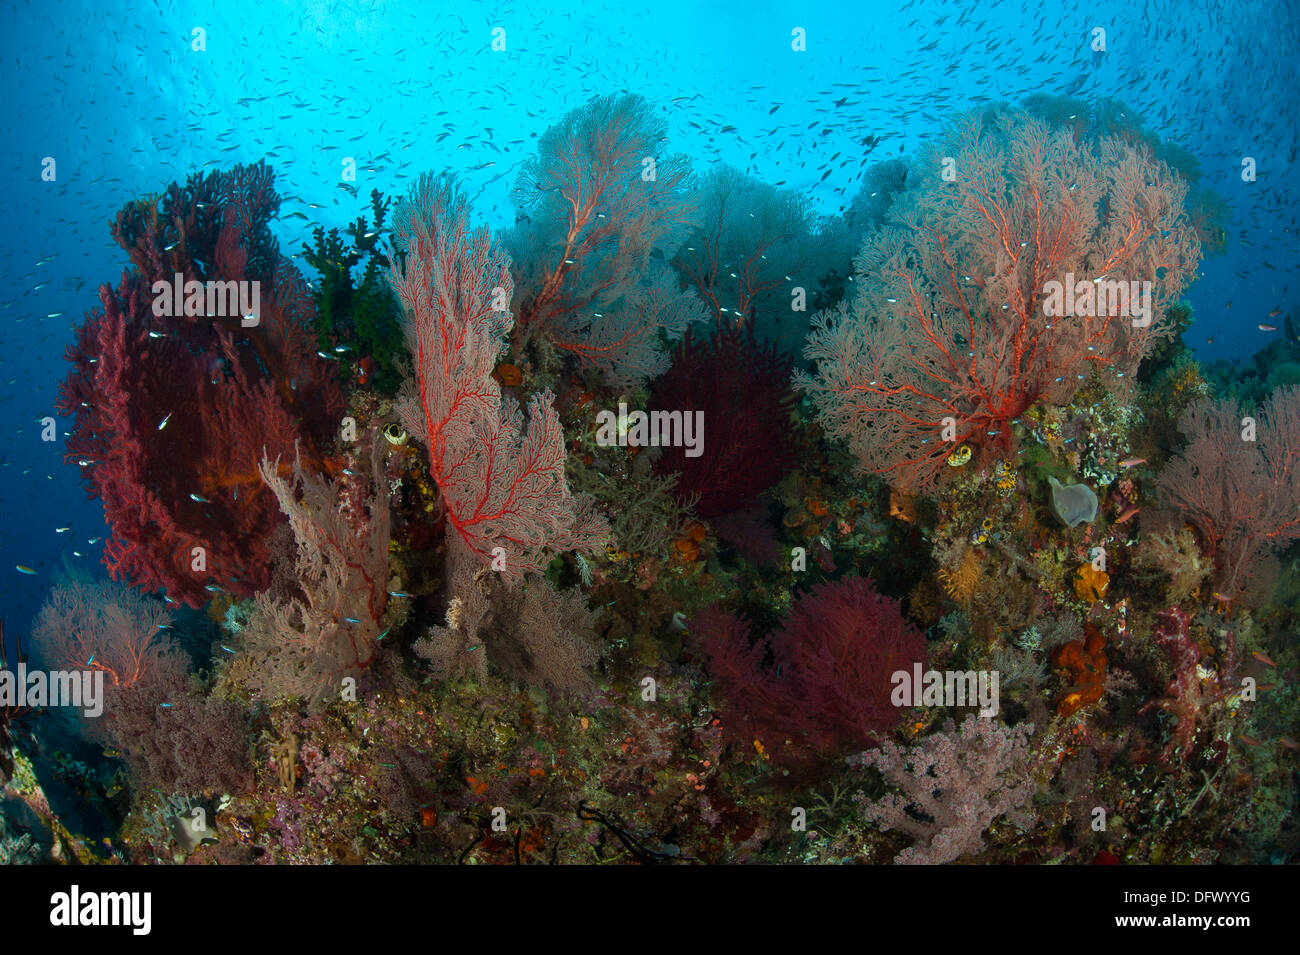 Reefscape in Raja Ampat covered in gorgonians, West Papua, Indonesia. Stock Photo